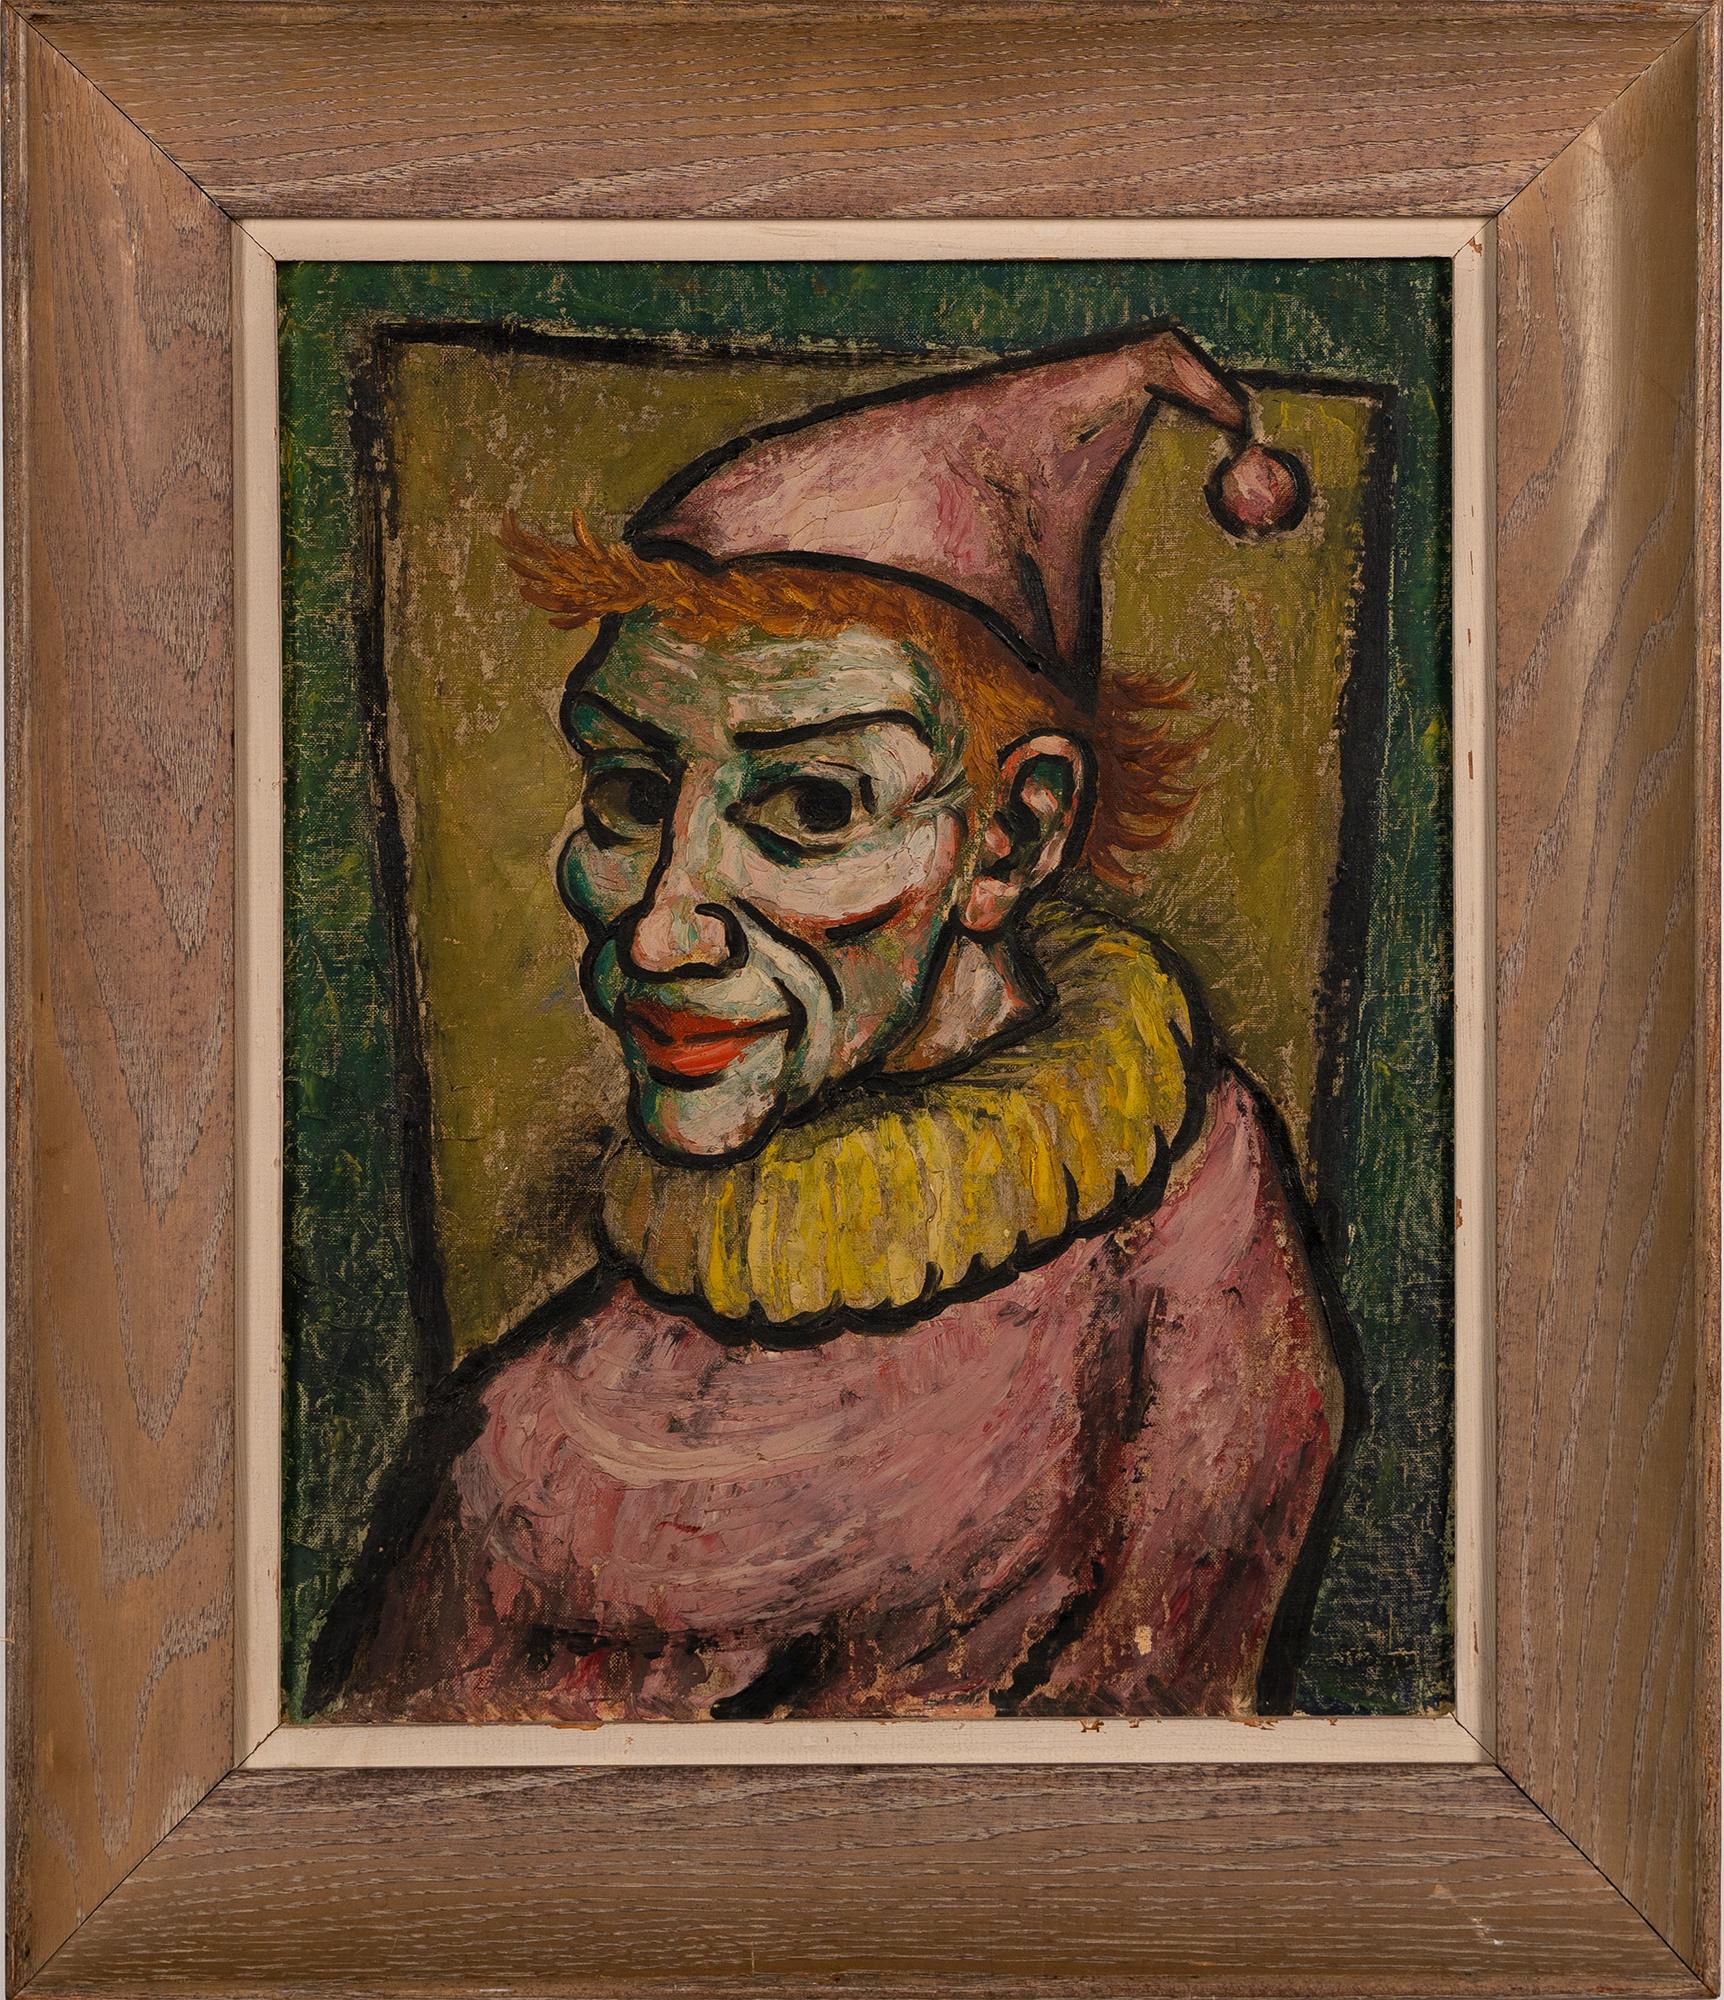 Unknown Abstract Painting - Vintage American Modernist Clown Portrait Oil Painting